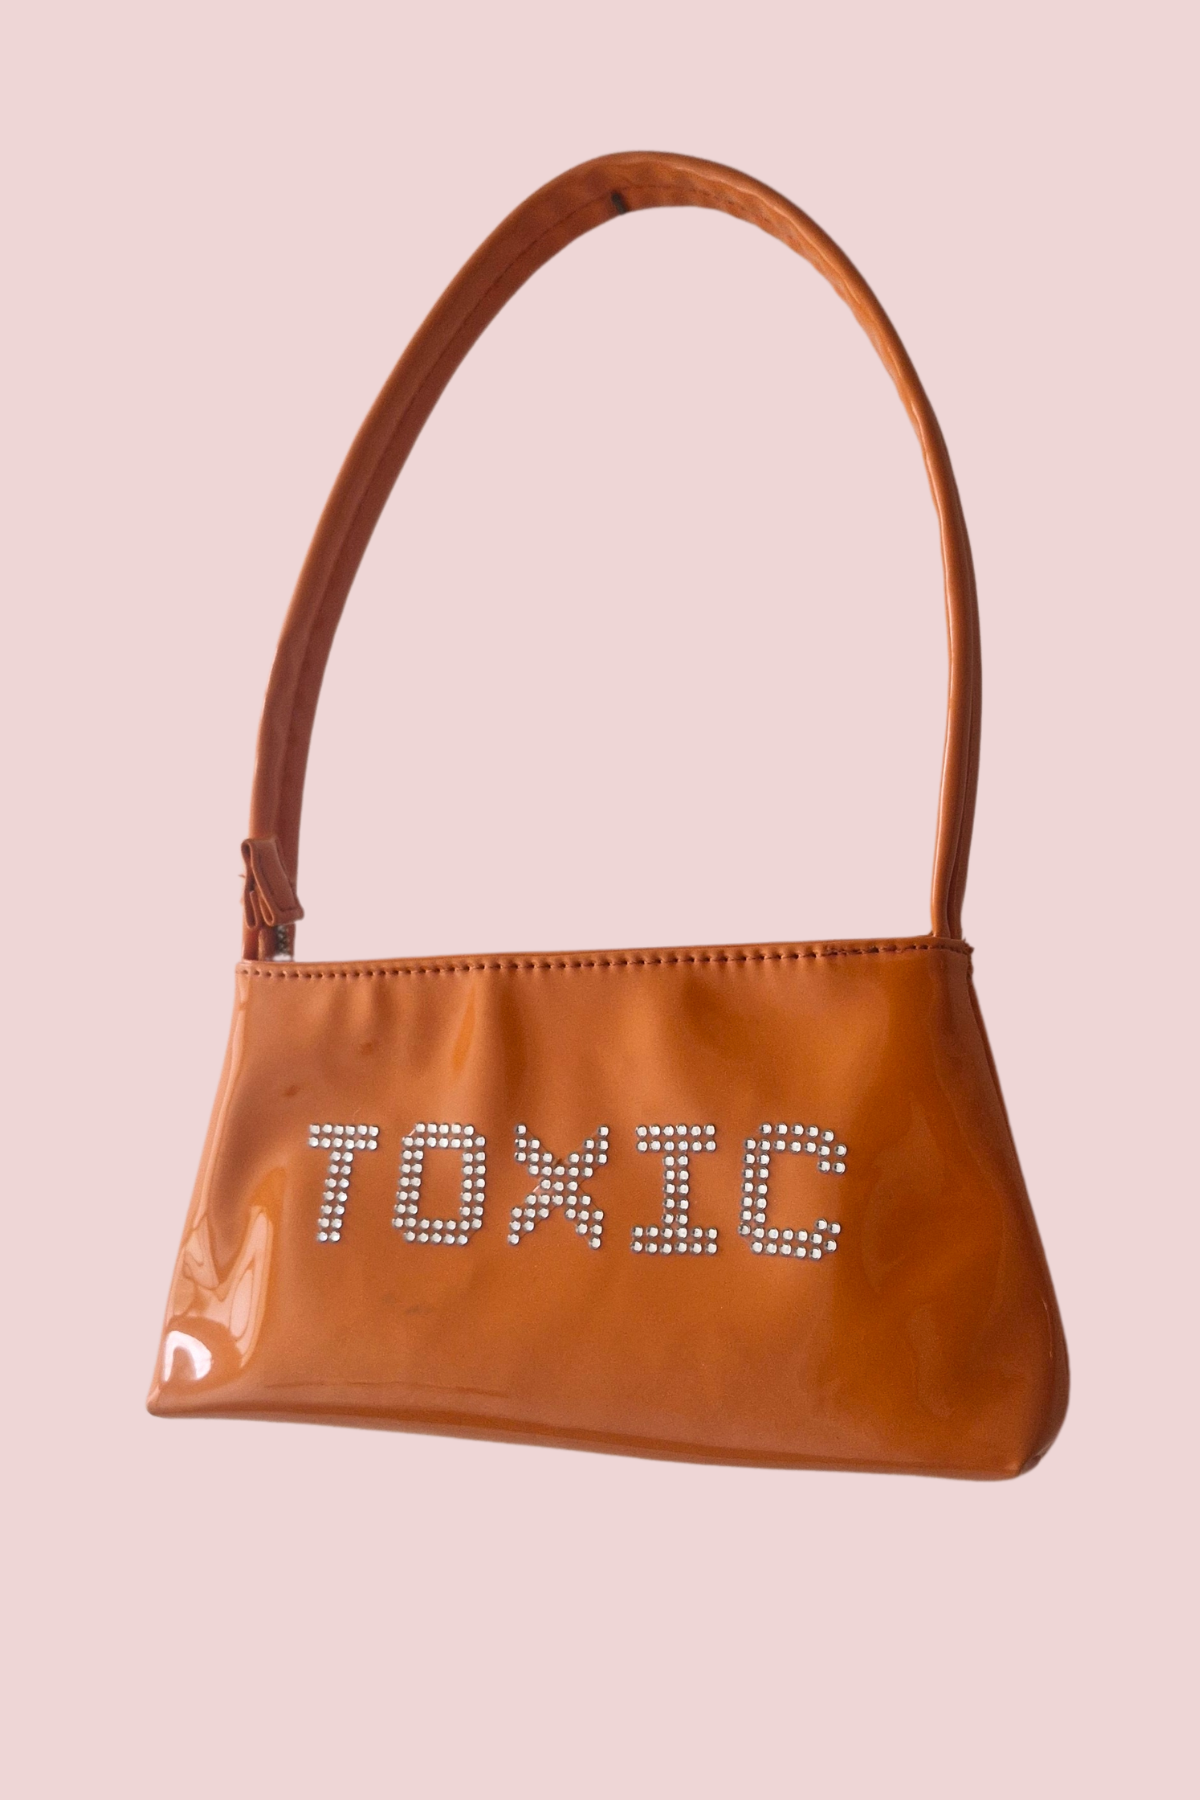 👜🧡 Daddy's Gurl Resurrected Couture Bag: TOXIC Orange 🧡✨